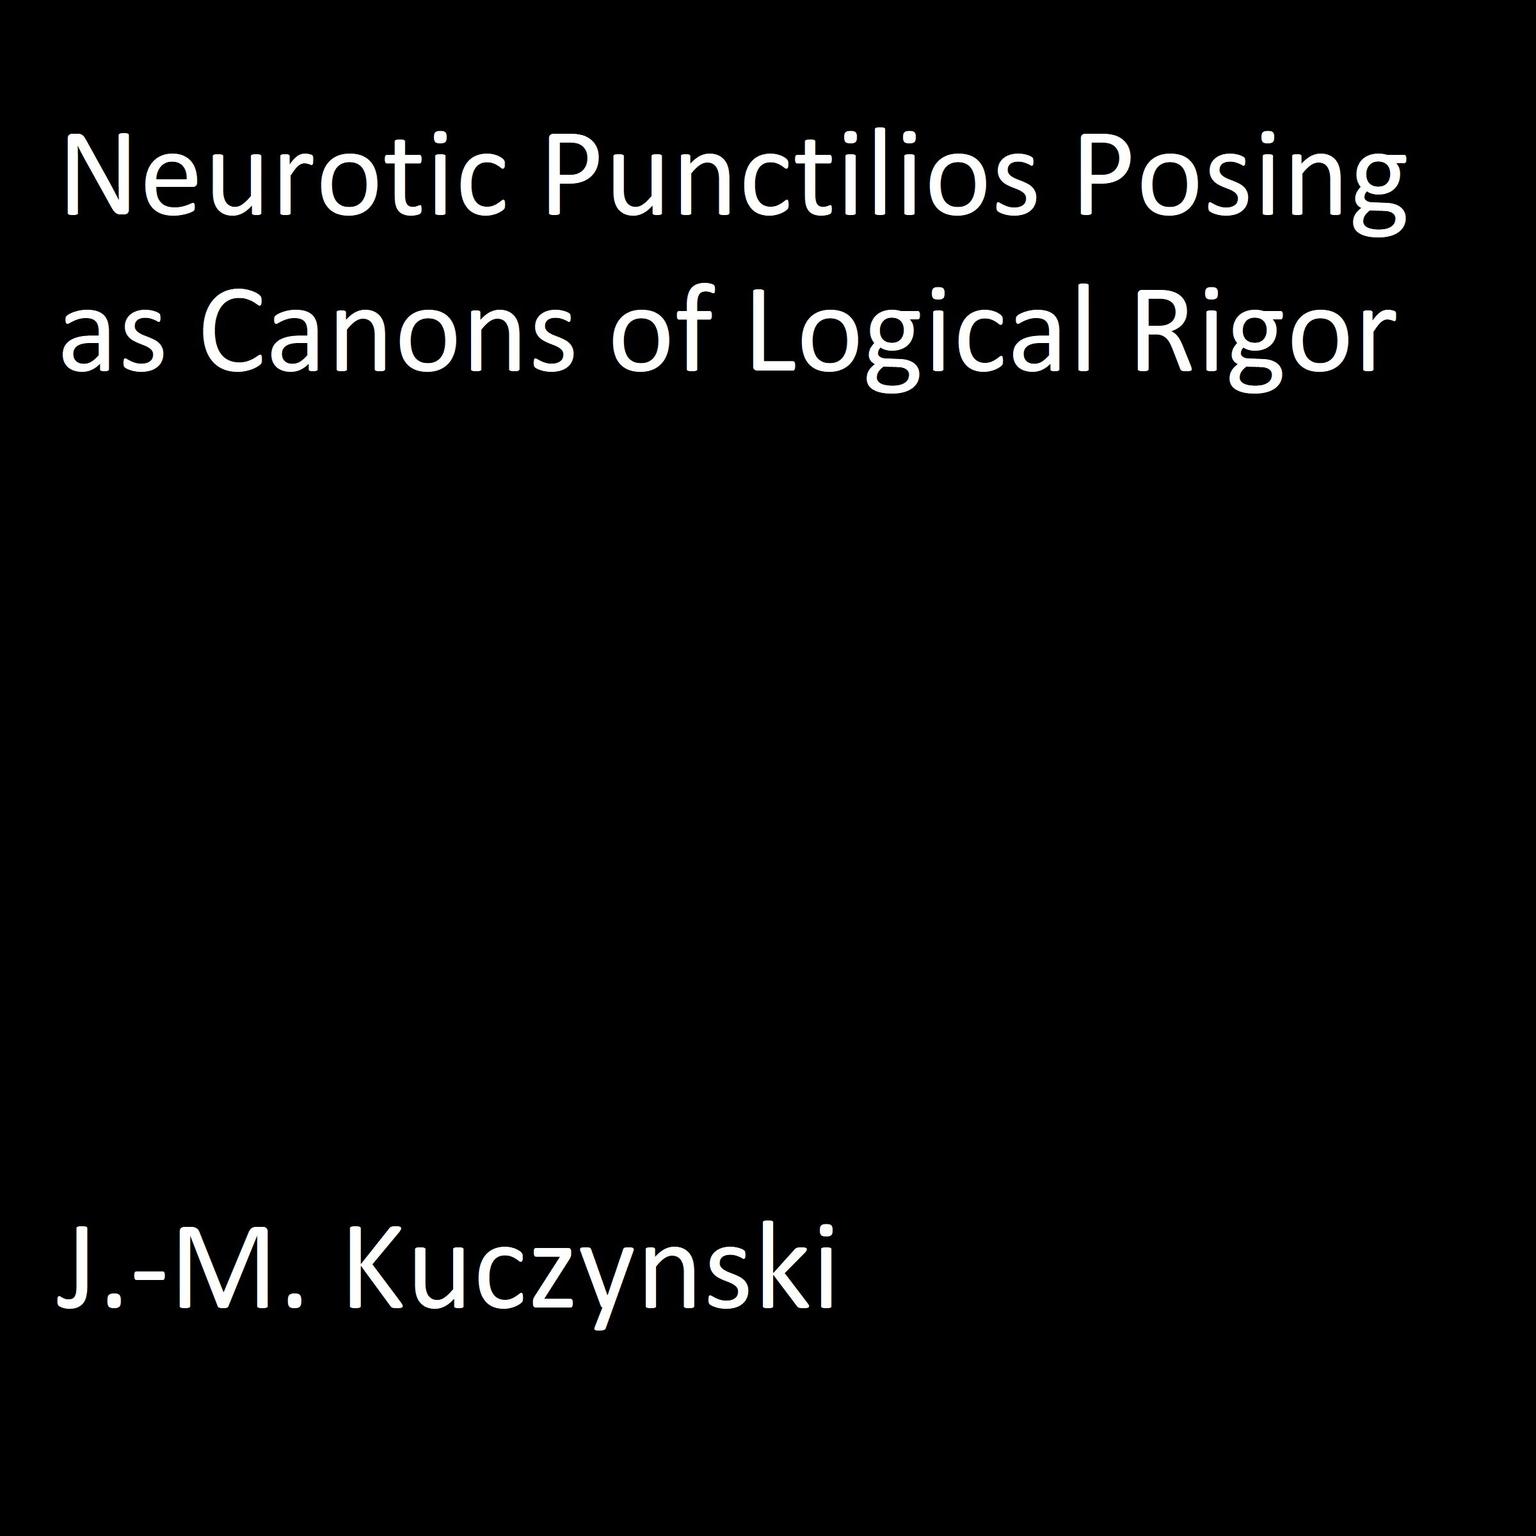 Neurotic Punctilios Posing as Canons of Logical Rigor Audiobook, by J. M. Kuczynski